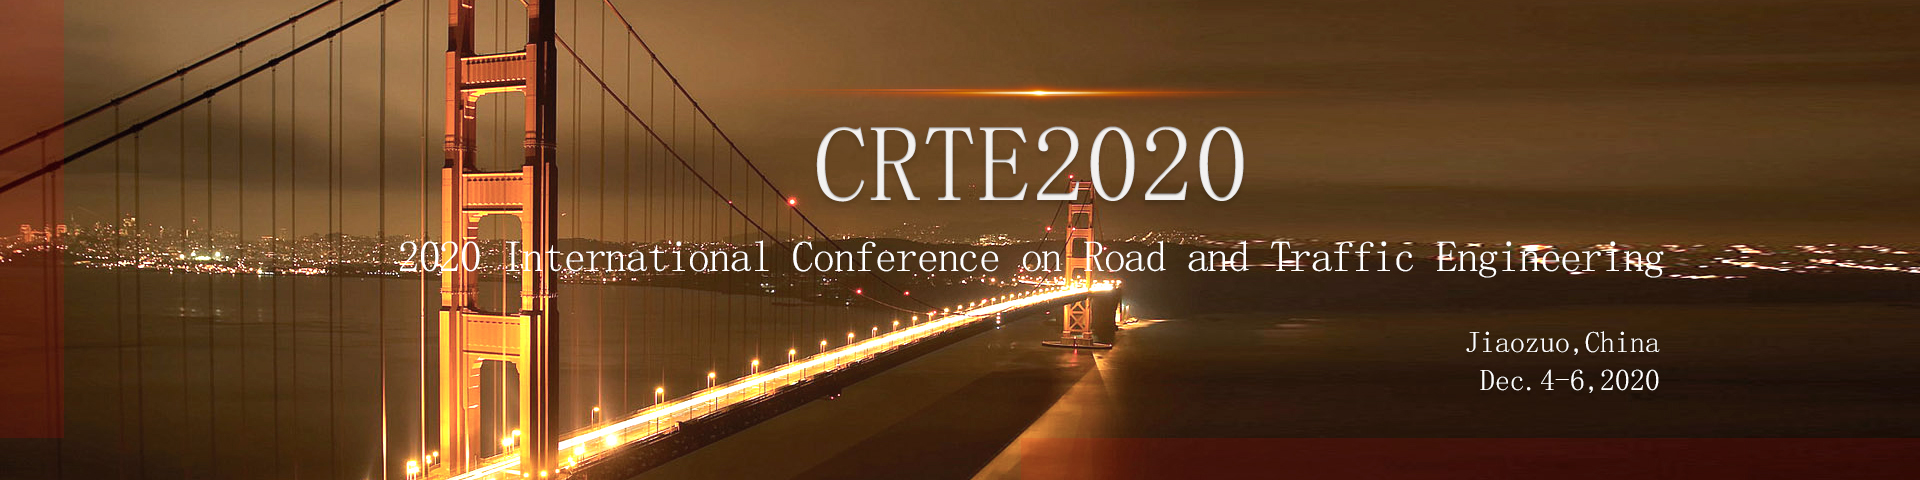 2020 International Conference on Road and Traffic Engineering, Jiaozuo, Hubei, China